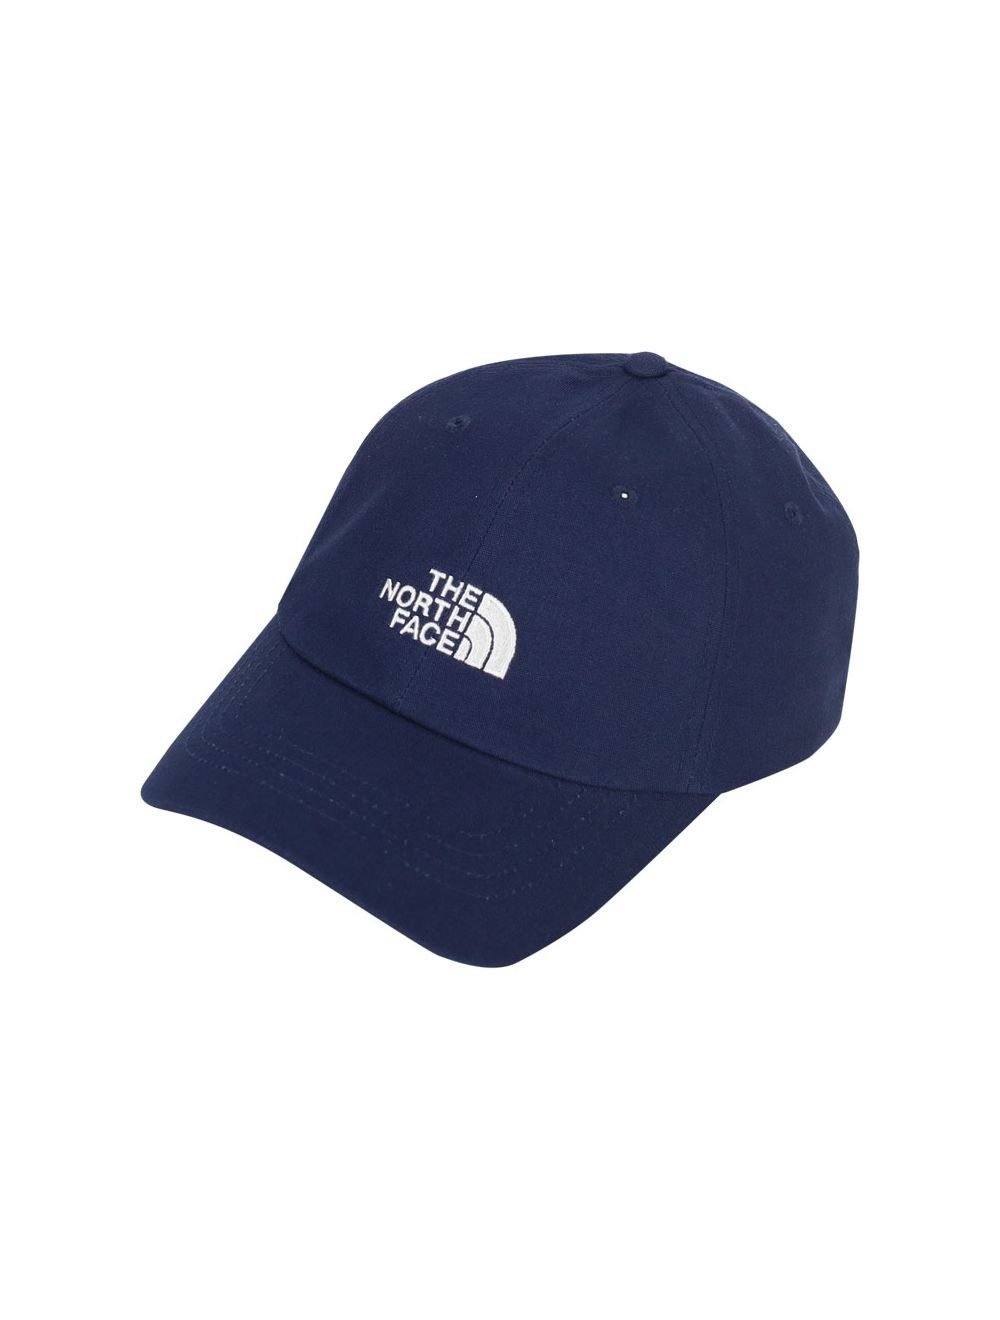 The North Navy Face Hat Norm Summit